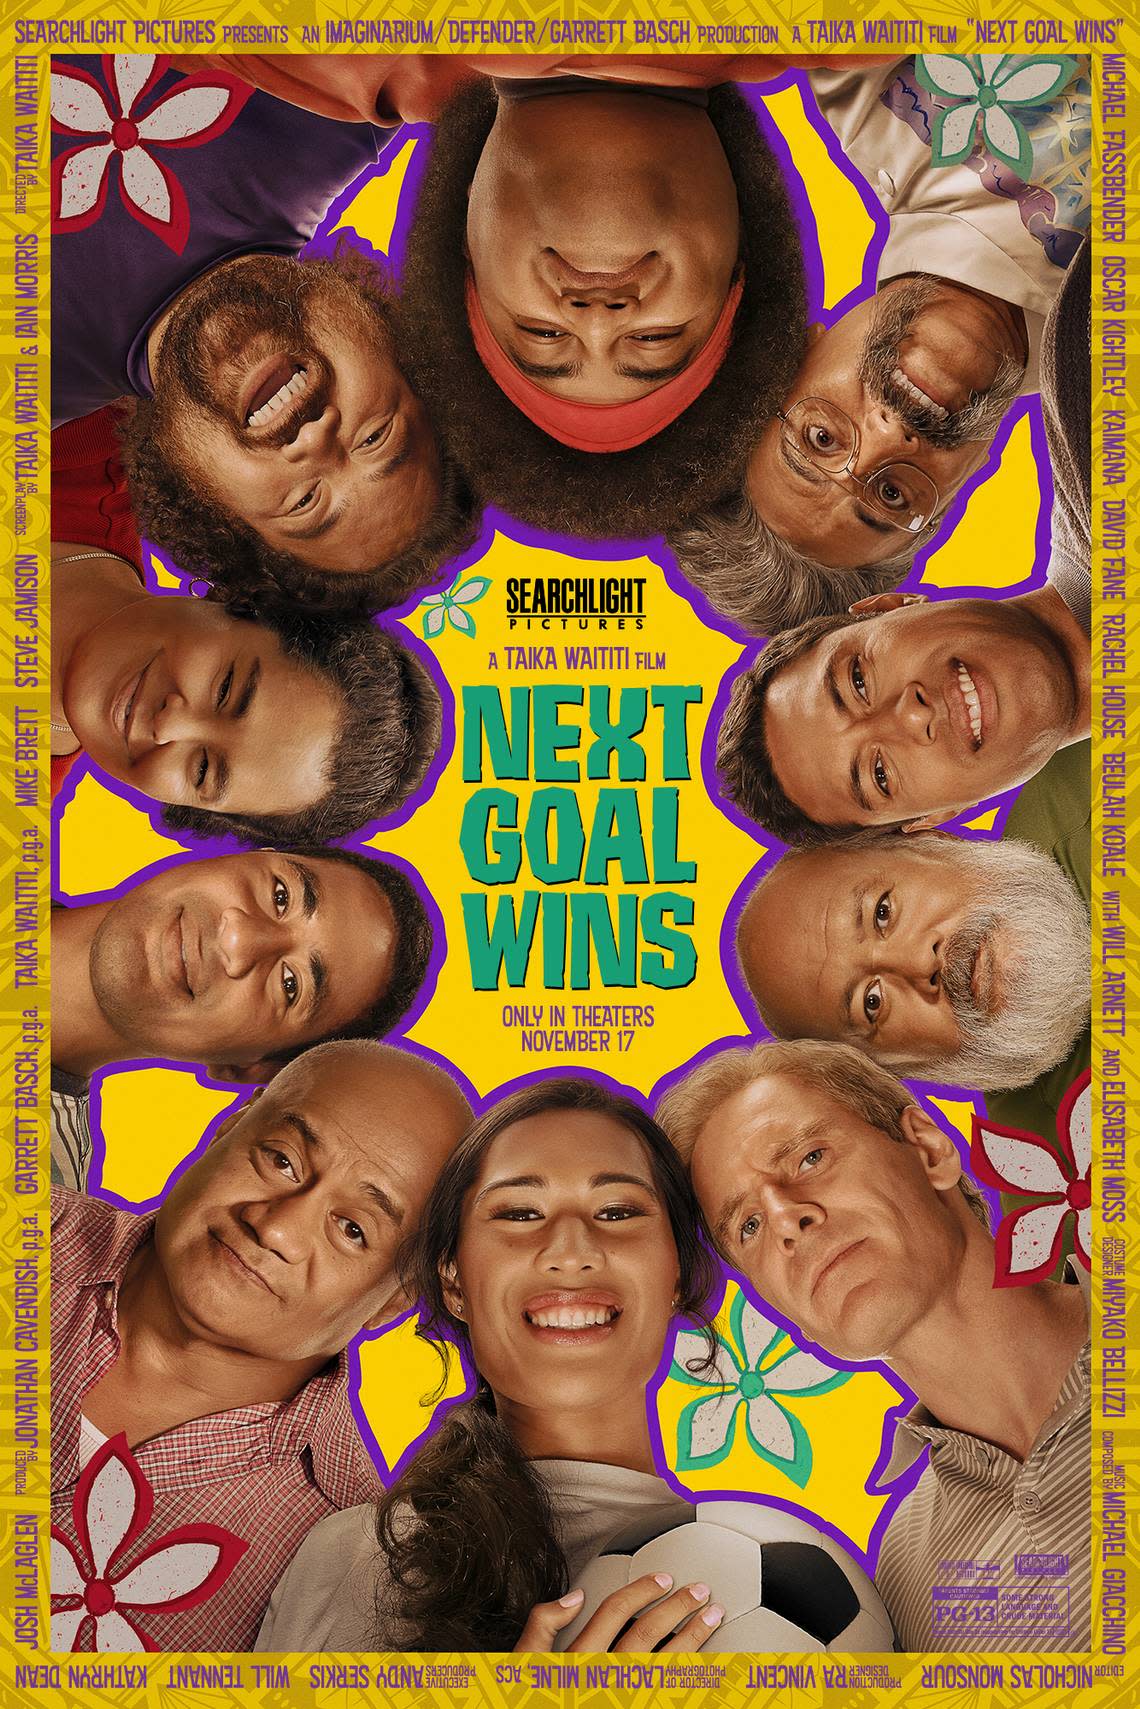 Former Ft. Lauderdale Striker Thomas Rongen, now Inter Miami radio announcer, is the subject of the new film Next Goal Wins, about Rongen’s journey as coach of American Samoa national team.